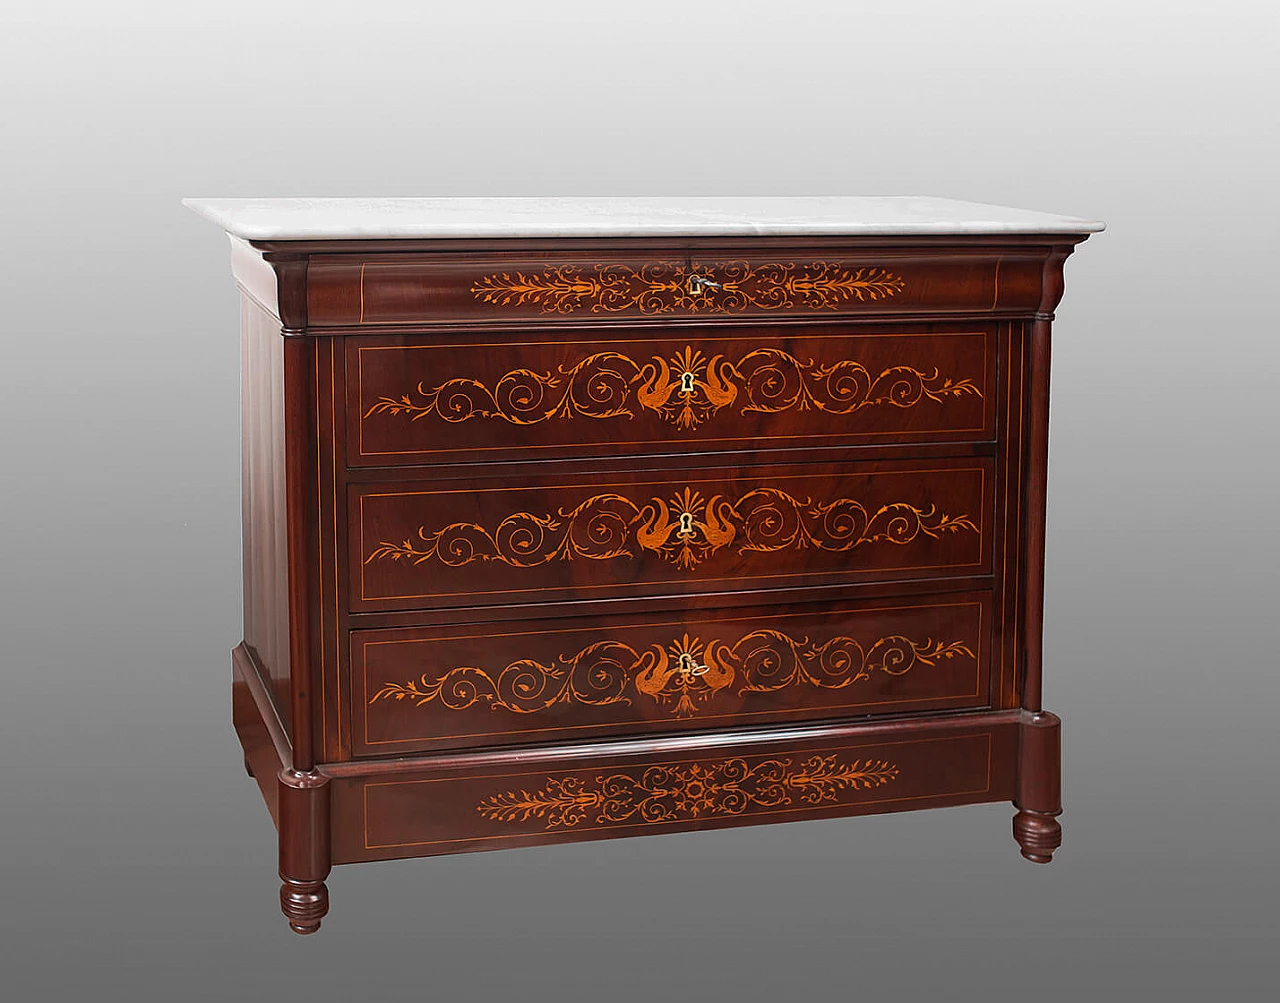 French Charles X chest of drawers in mahogany with maple inlay, 19th century 1375280